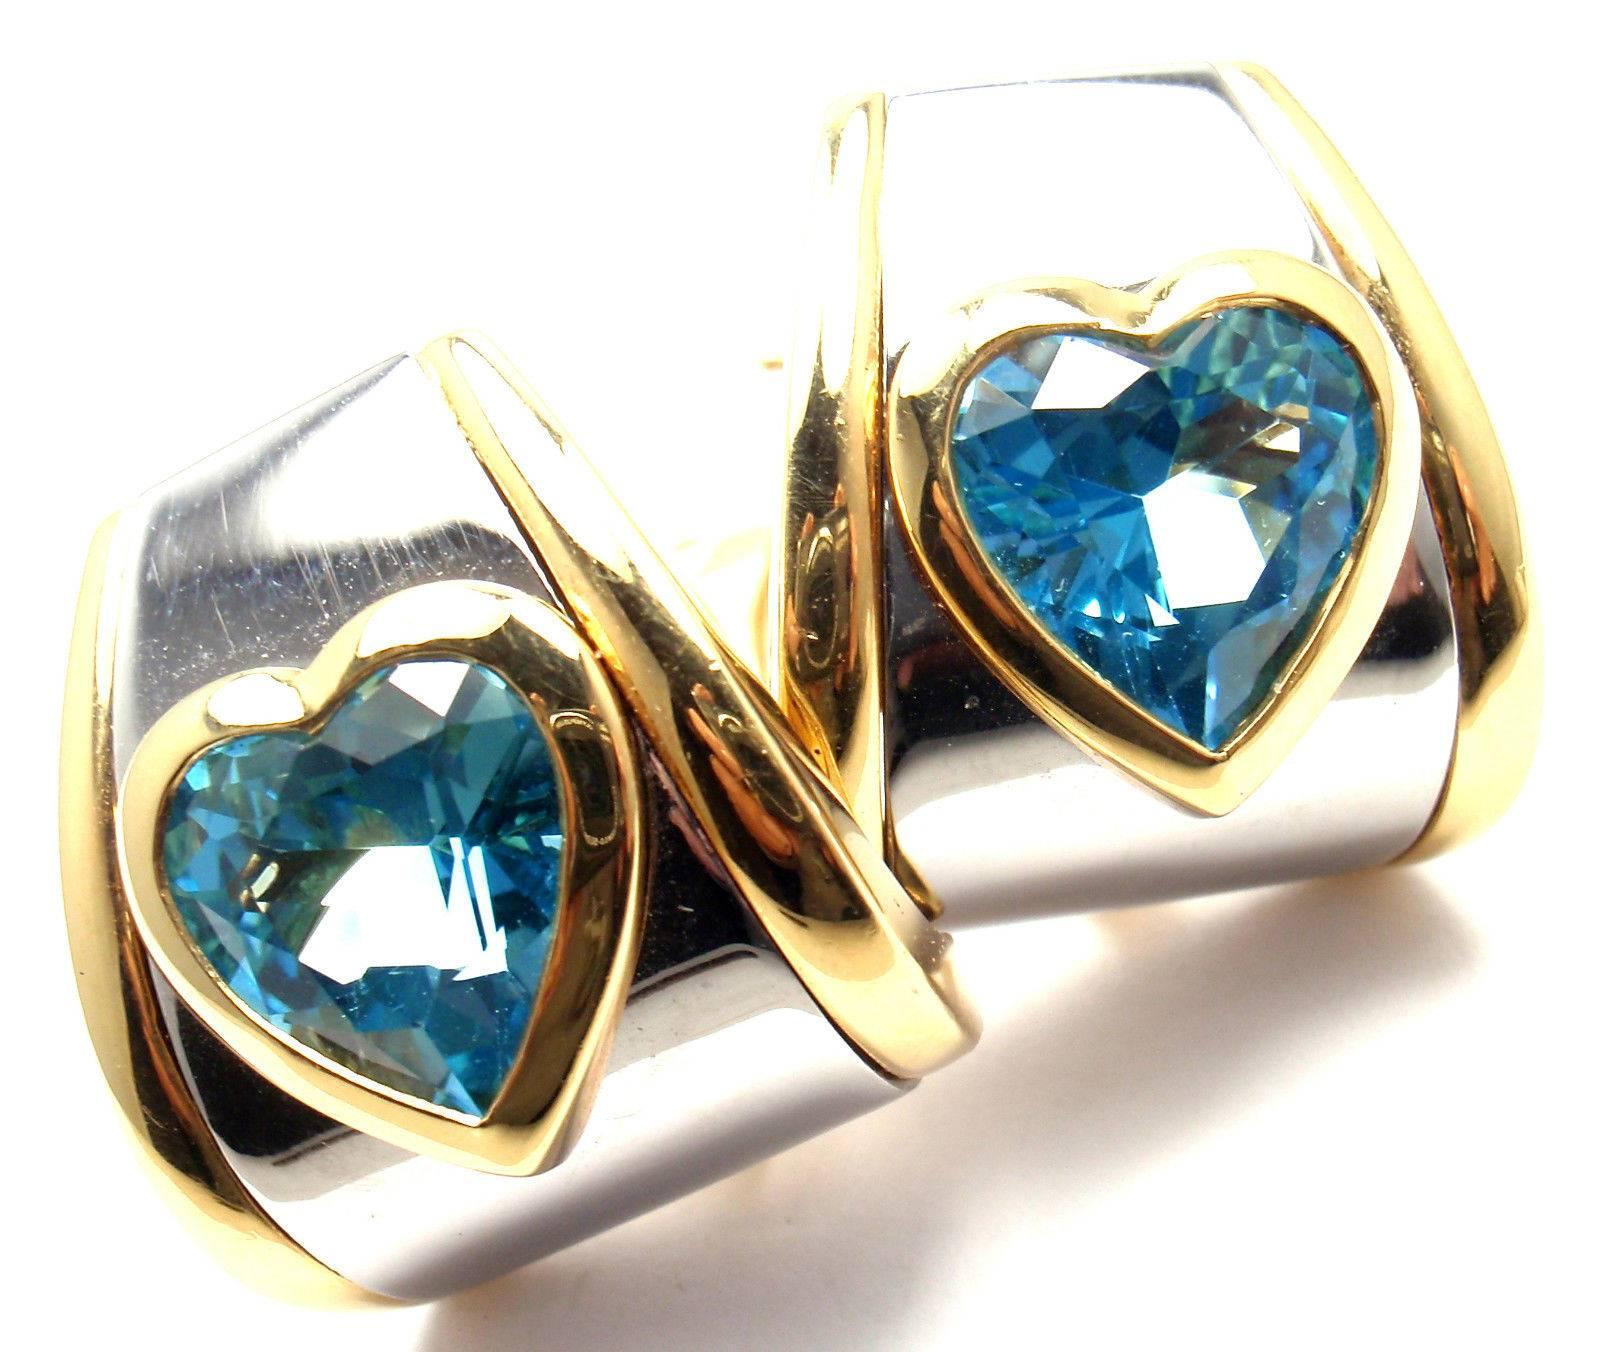 18k Yellow Gold And Stainless Steel Heart Shape Blue Topaz Earrings by Marina B. 
With 2 heart shape blue topaz stones 13mm x 12mm each.
These earrings are for non pierced ears, but can be converted for pierced ears.
Details:
Measurements: 20mm x